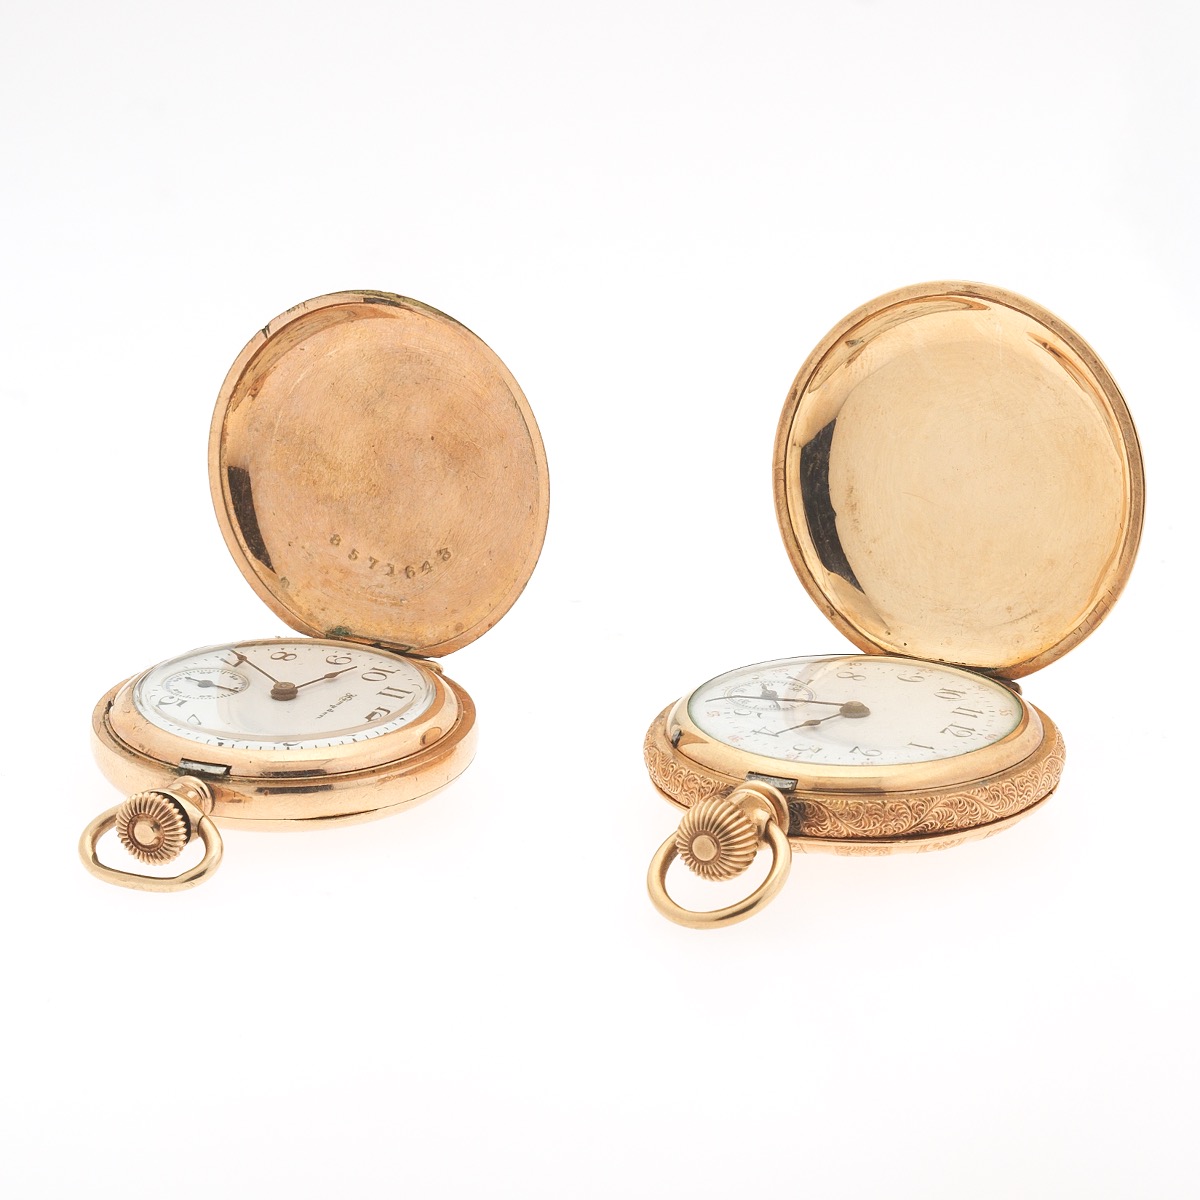 Two "O" Size Ladies Pendant Watches - Image 6 of 11